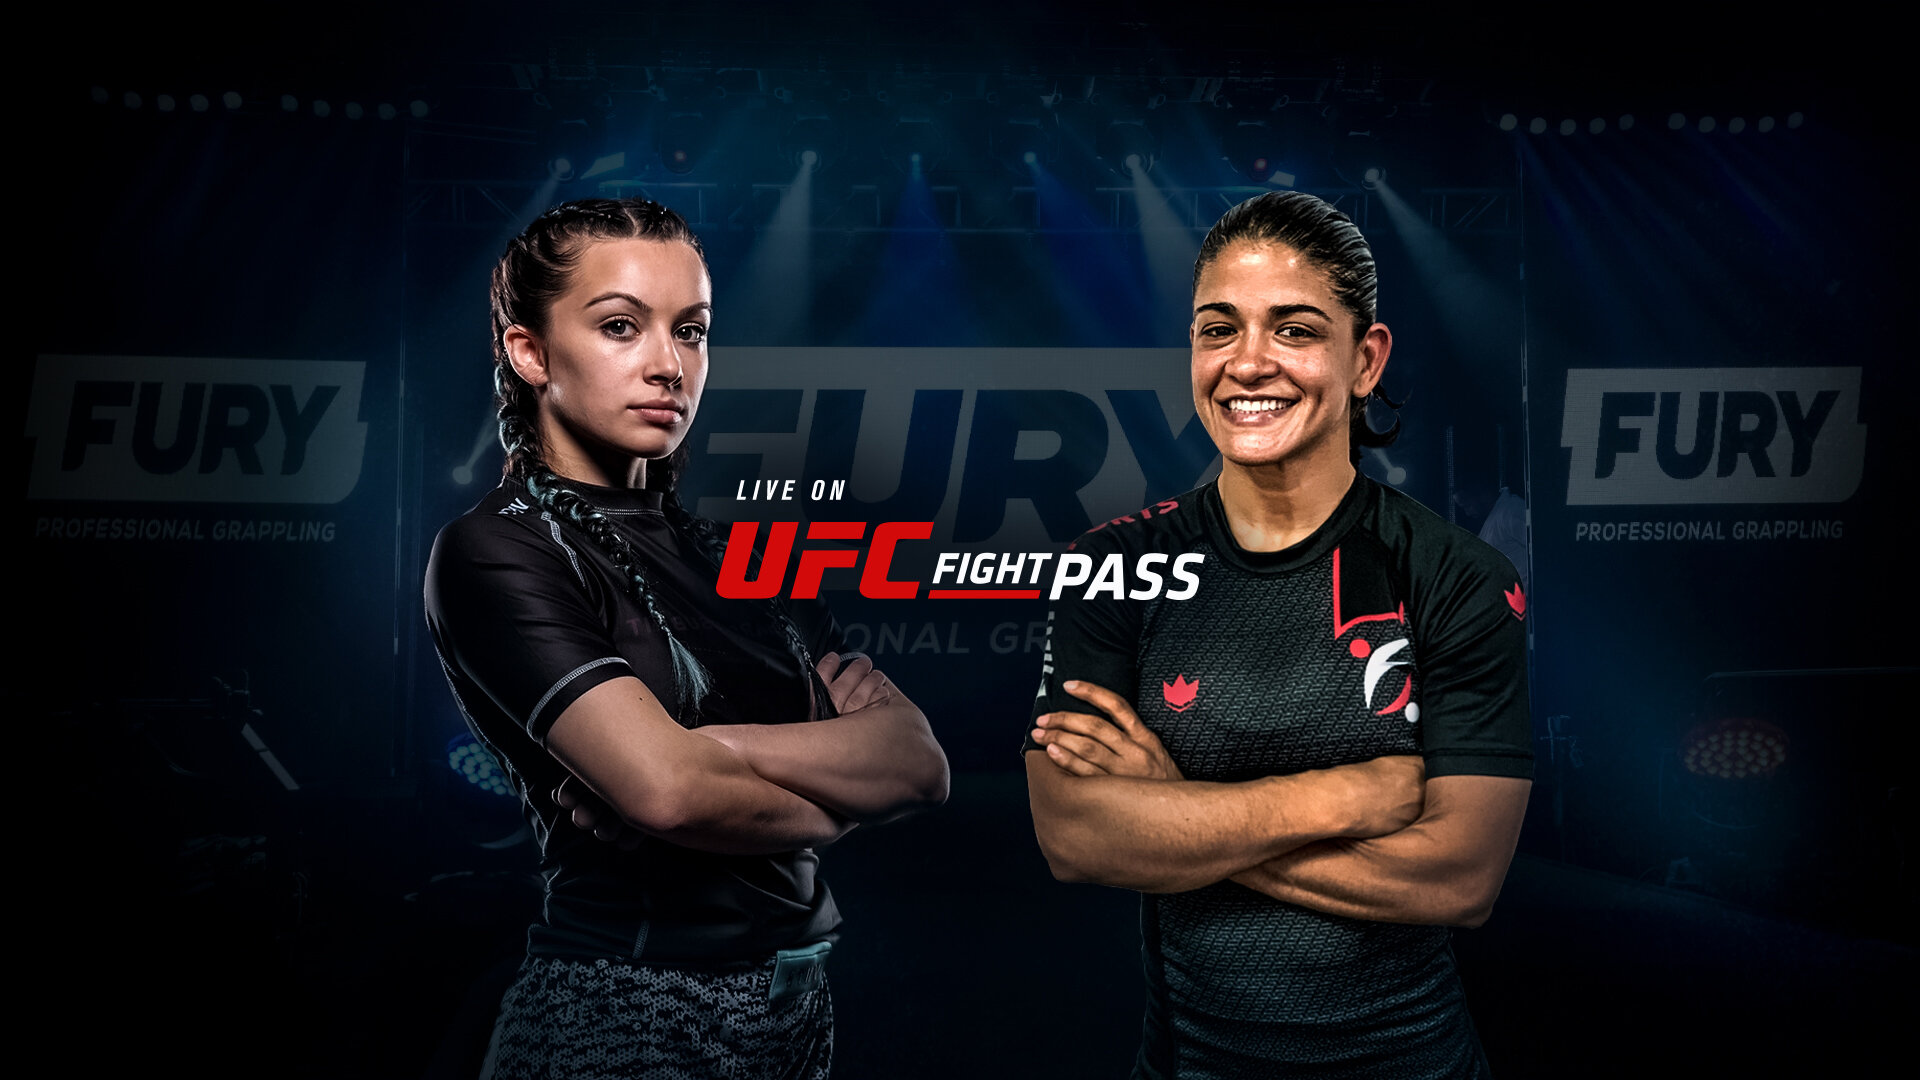 FURY Professional Grappling debuts July 2 on UFC FIGHT PASS — Cage Fury Fighting Championships